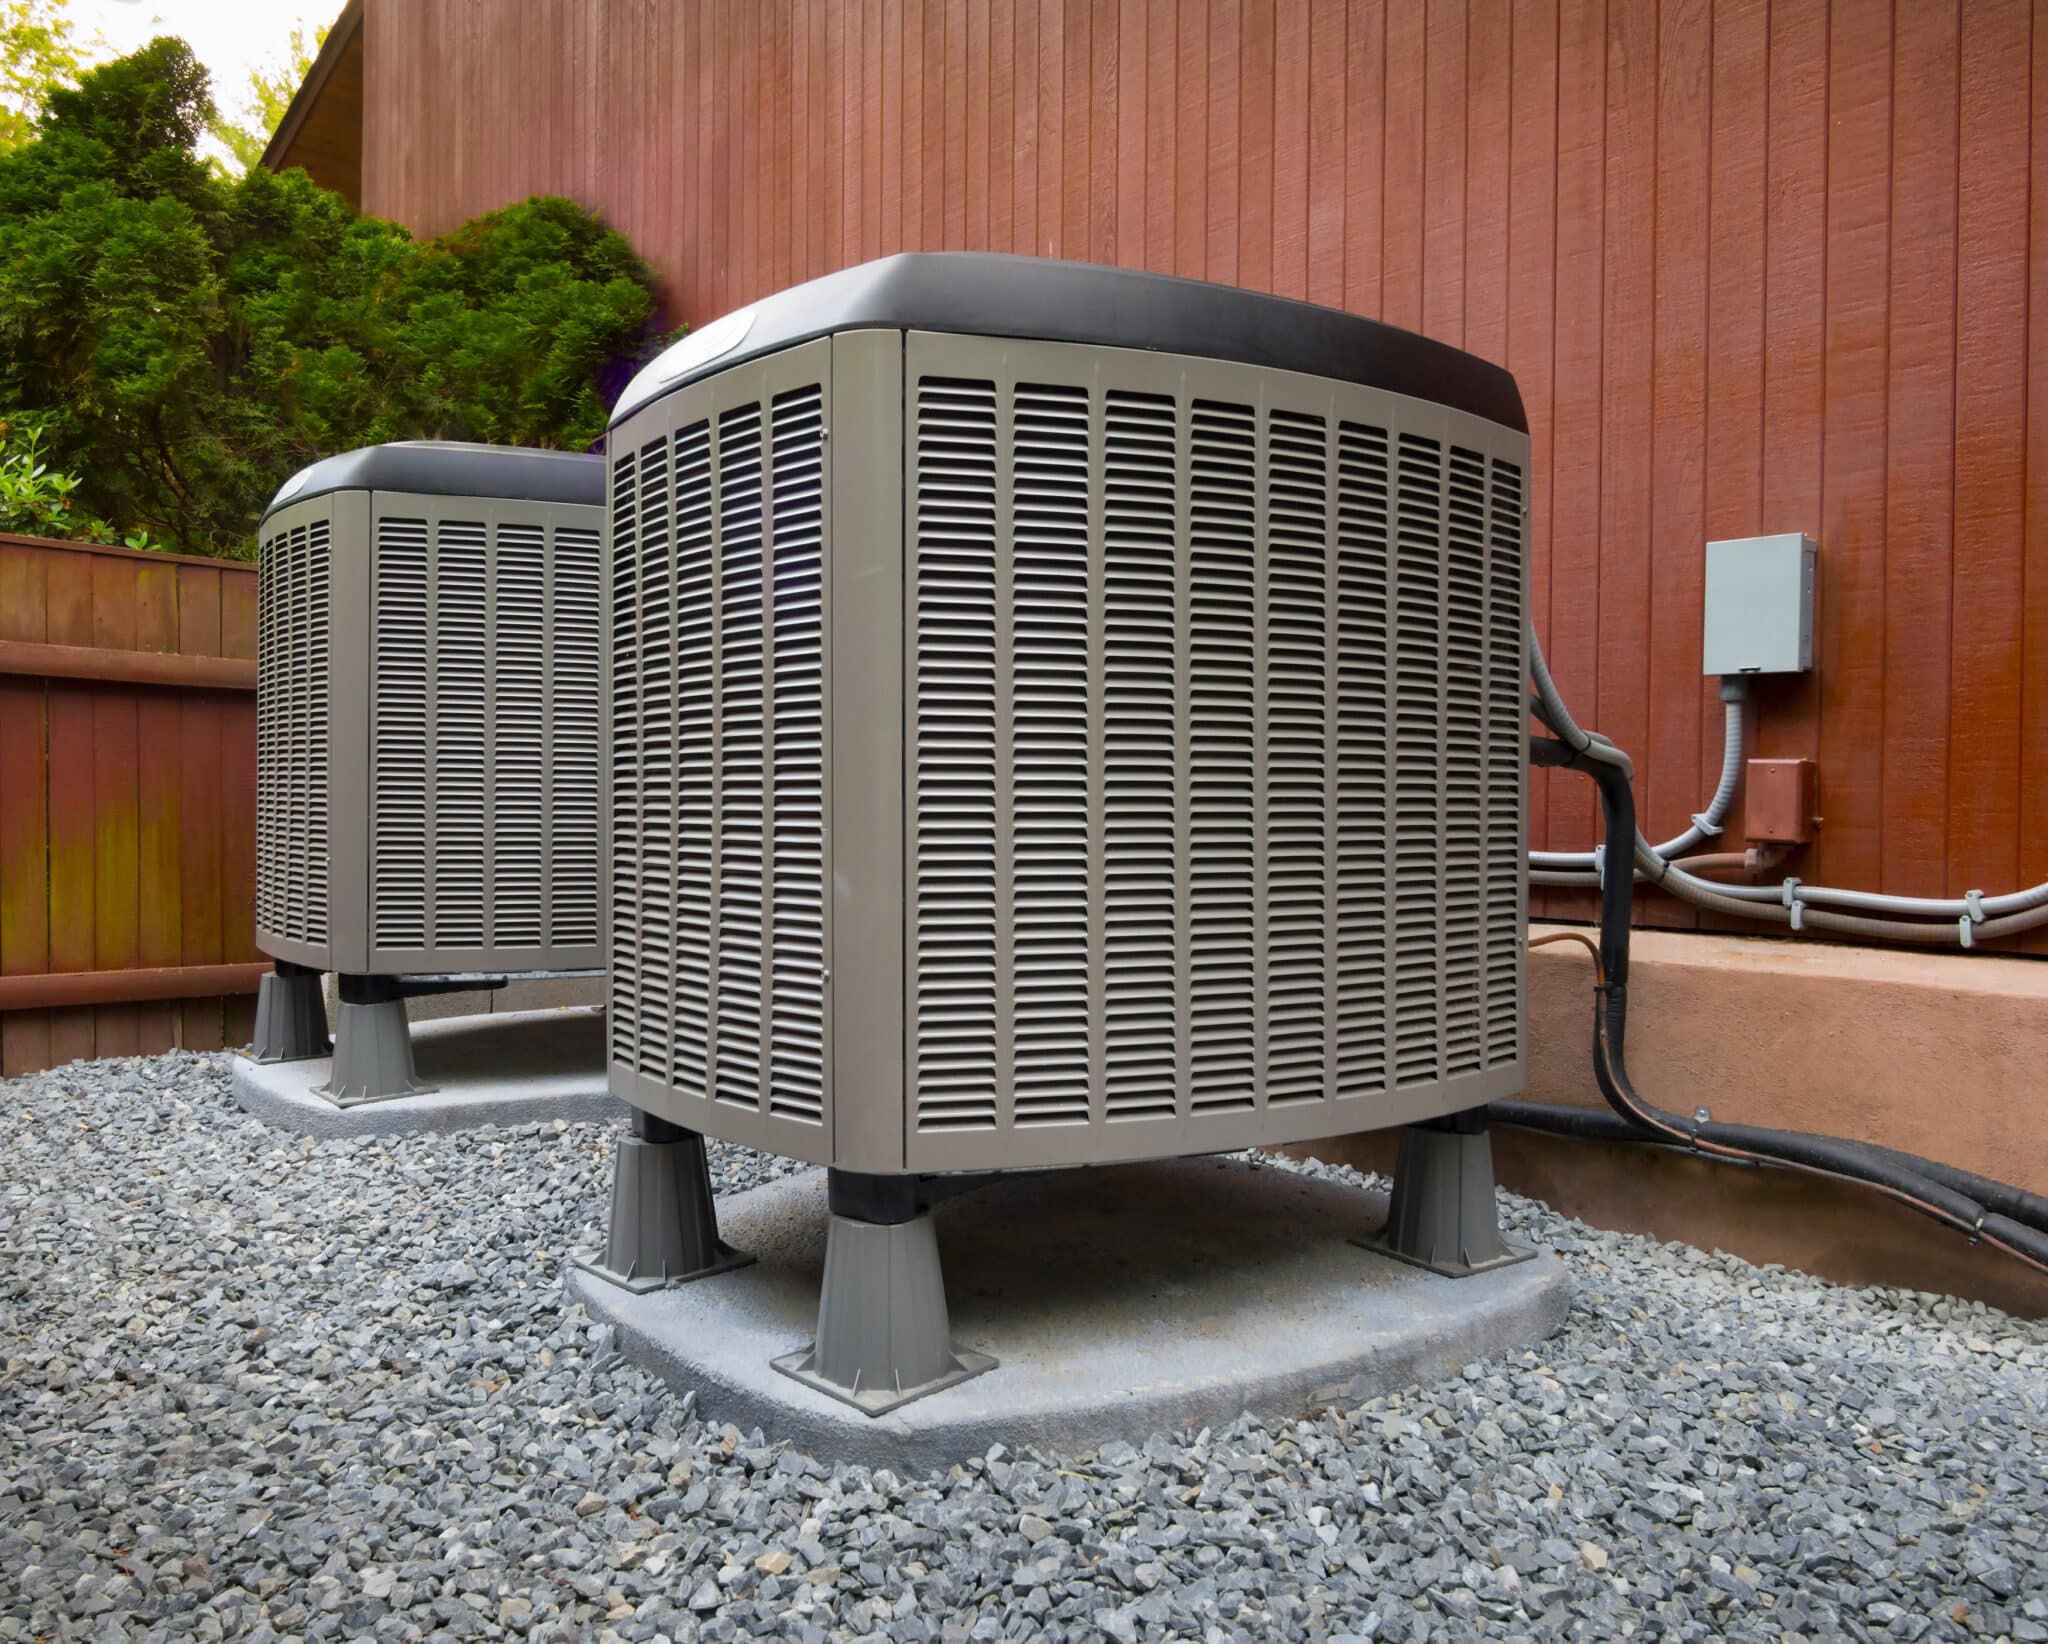 How much does it cost to install central air The price of staying cool explained